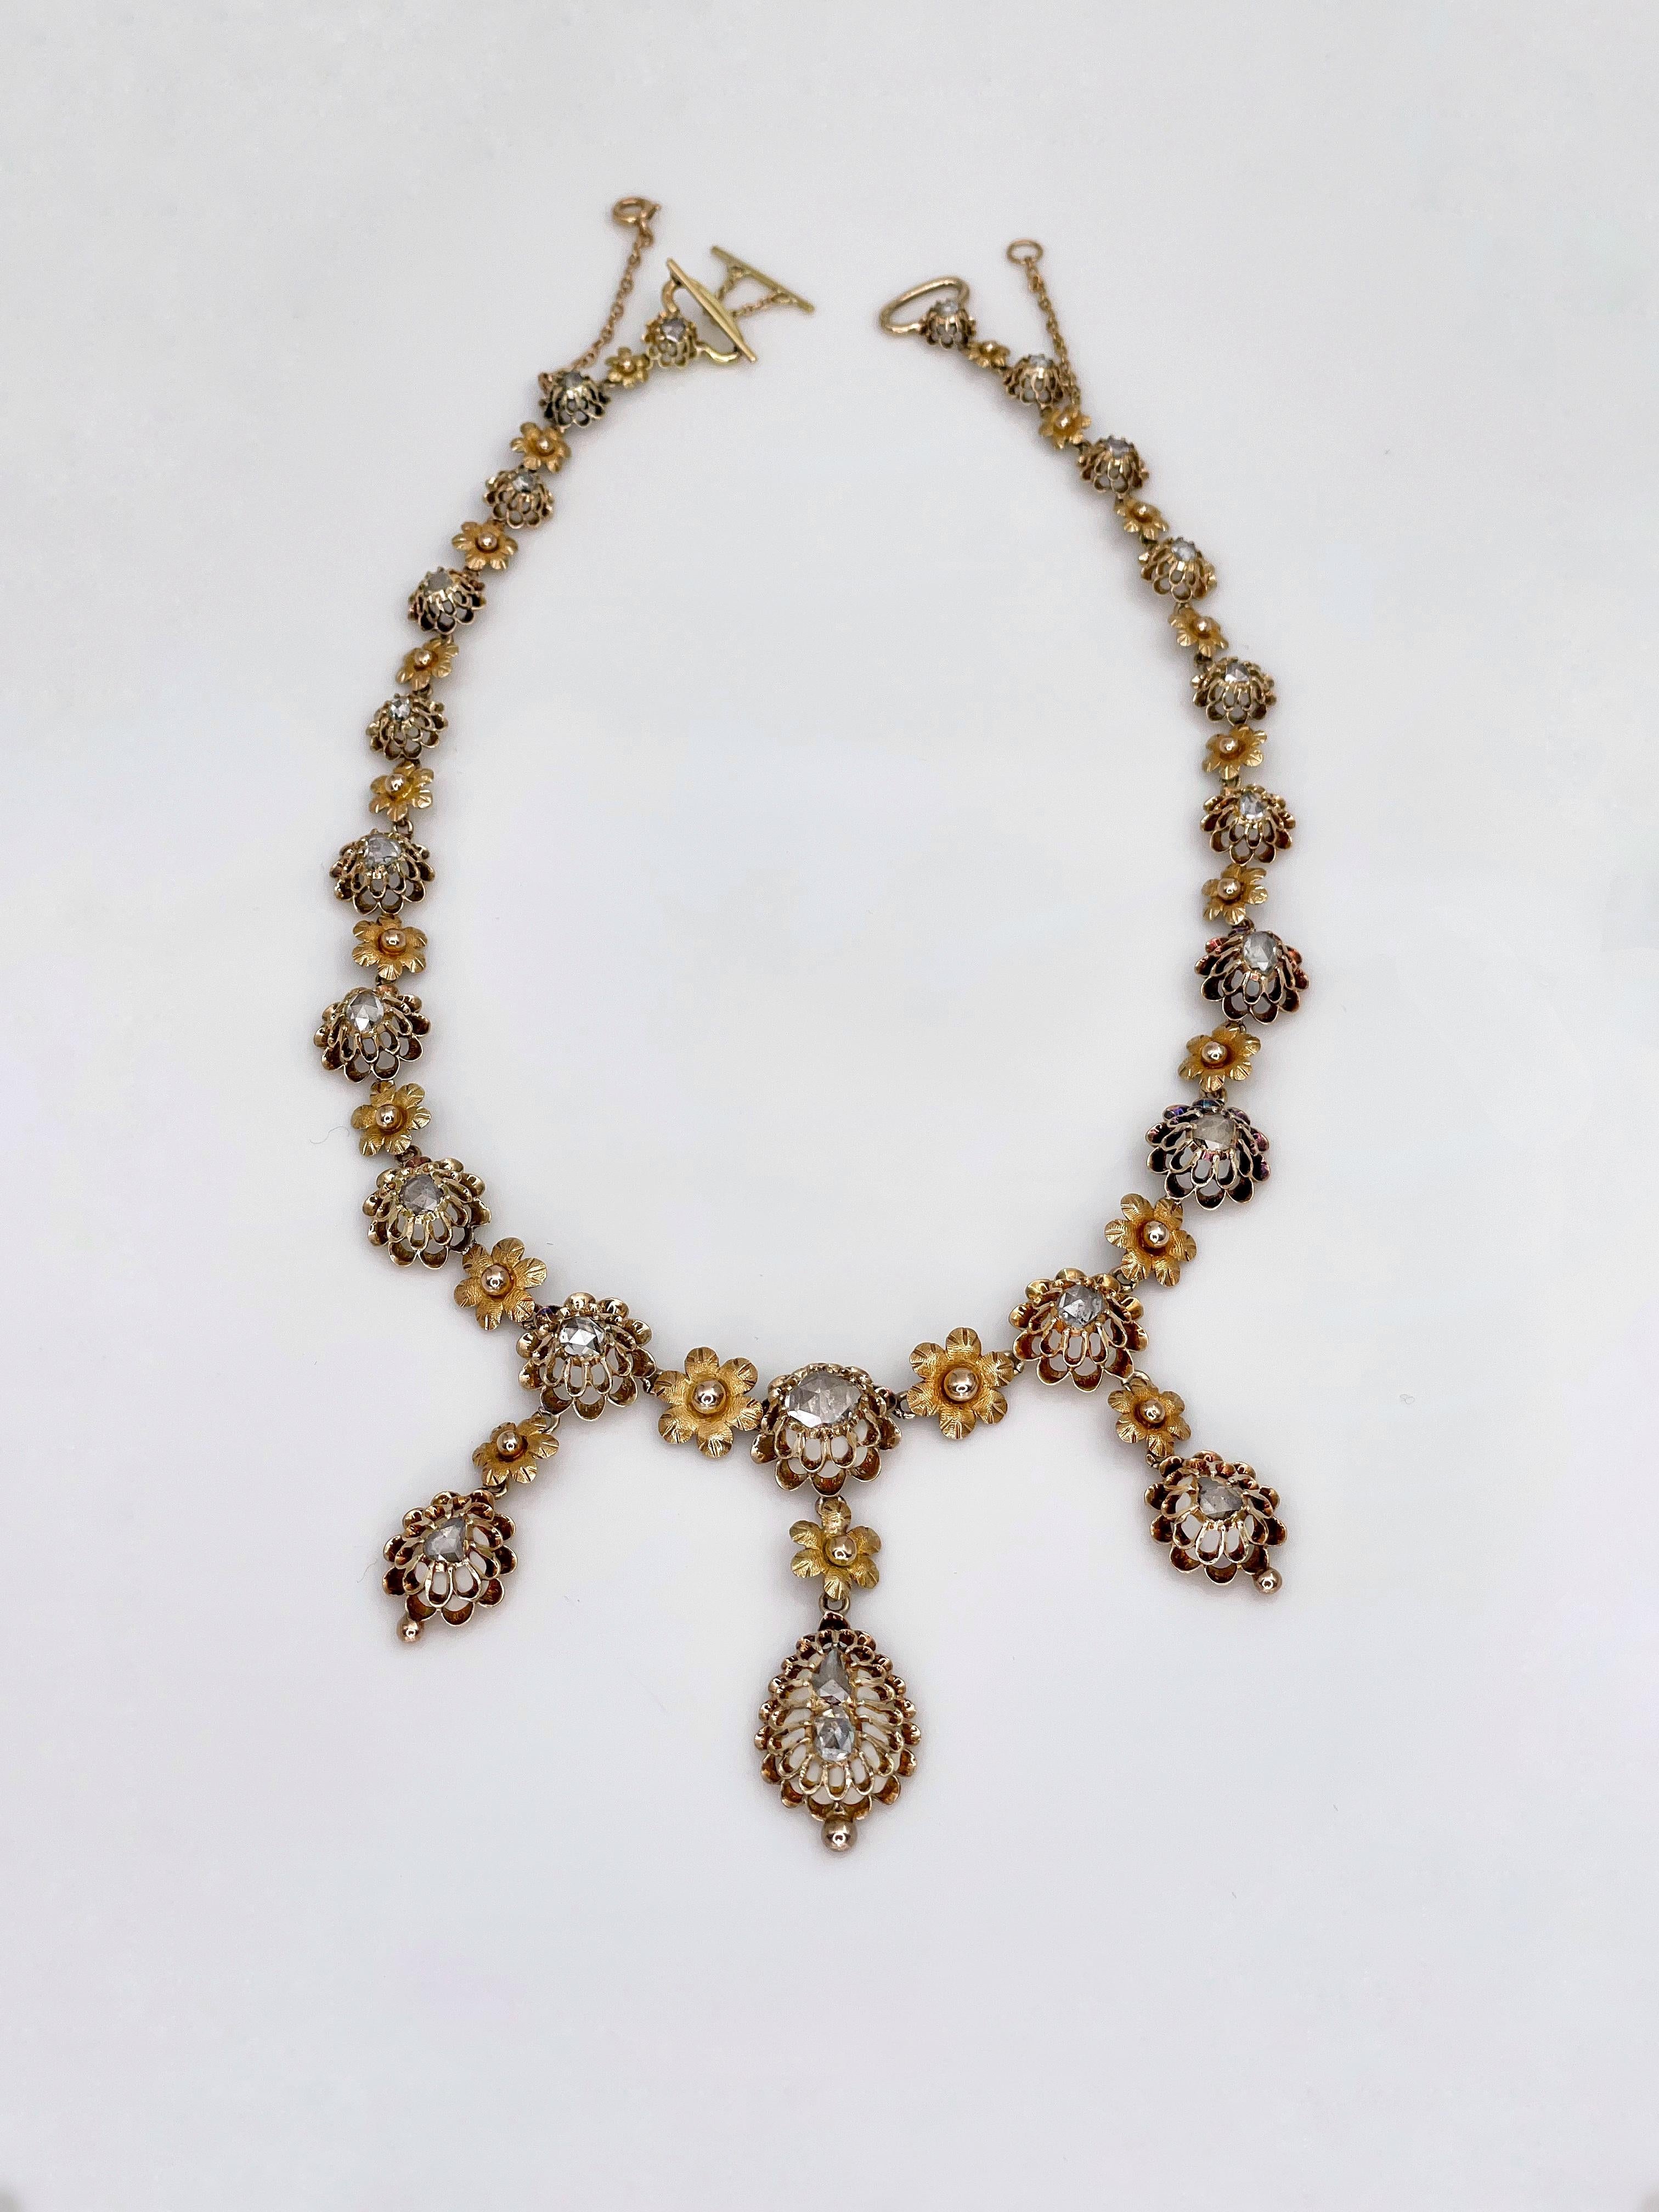 Antique Victorian 15K Yellow Gold and Rose Cut Diamonds Floral Necklace 1